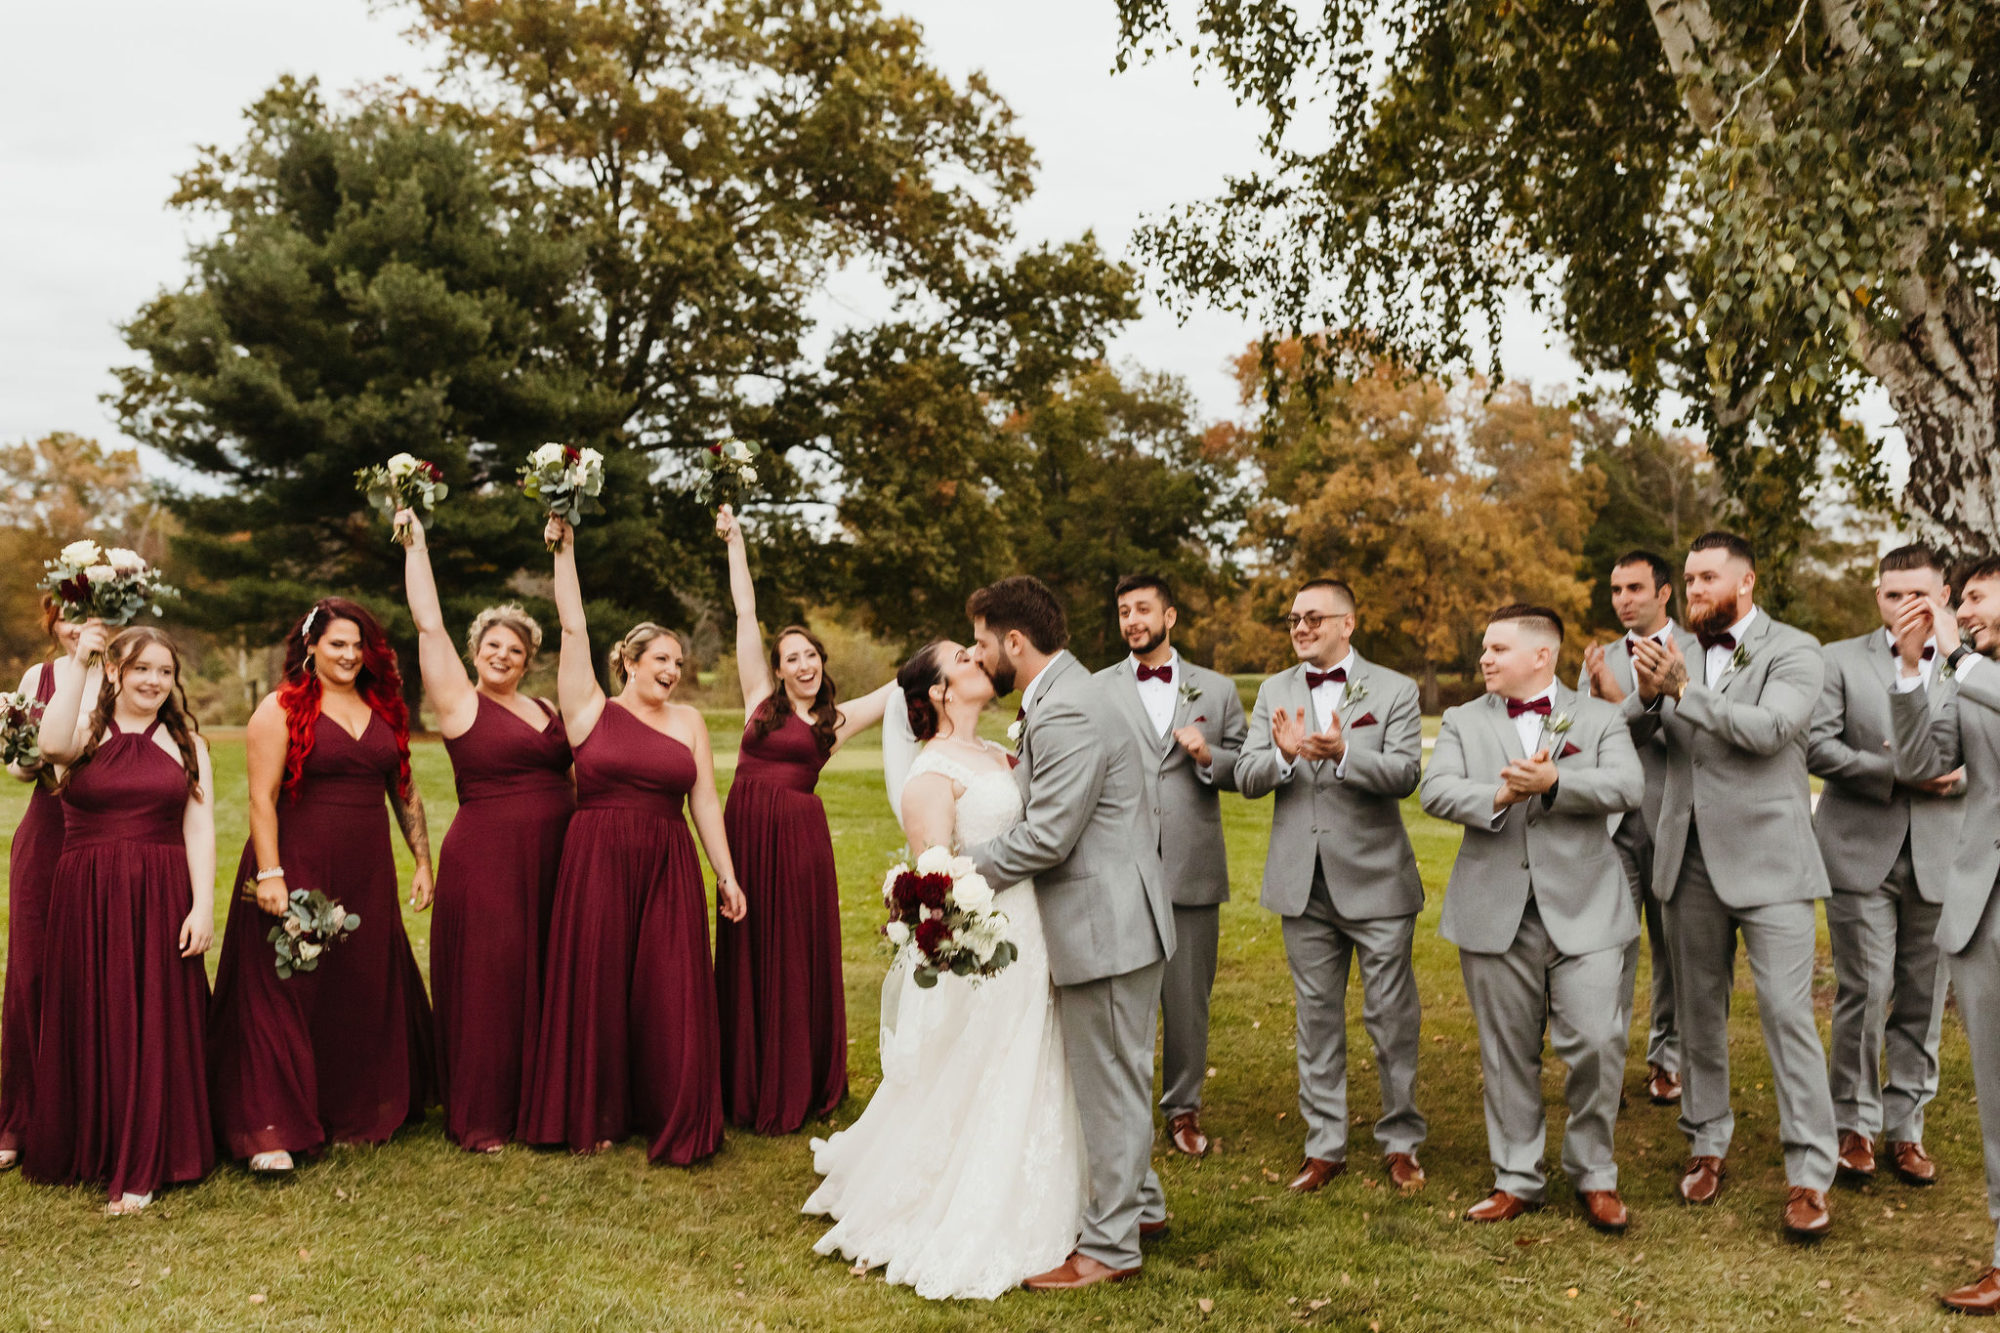 white Boutonnière, fall wedding, burgundy and green wedding, hudson valley wedding photographer, romantic rustic wedding, romantic fall wedding, wedding shoes, outdoor ceremony, octagon arch